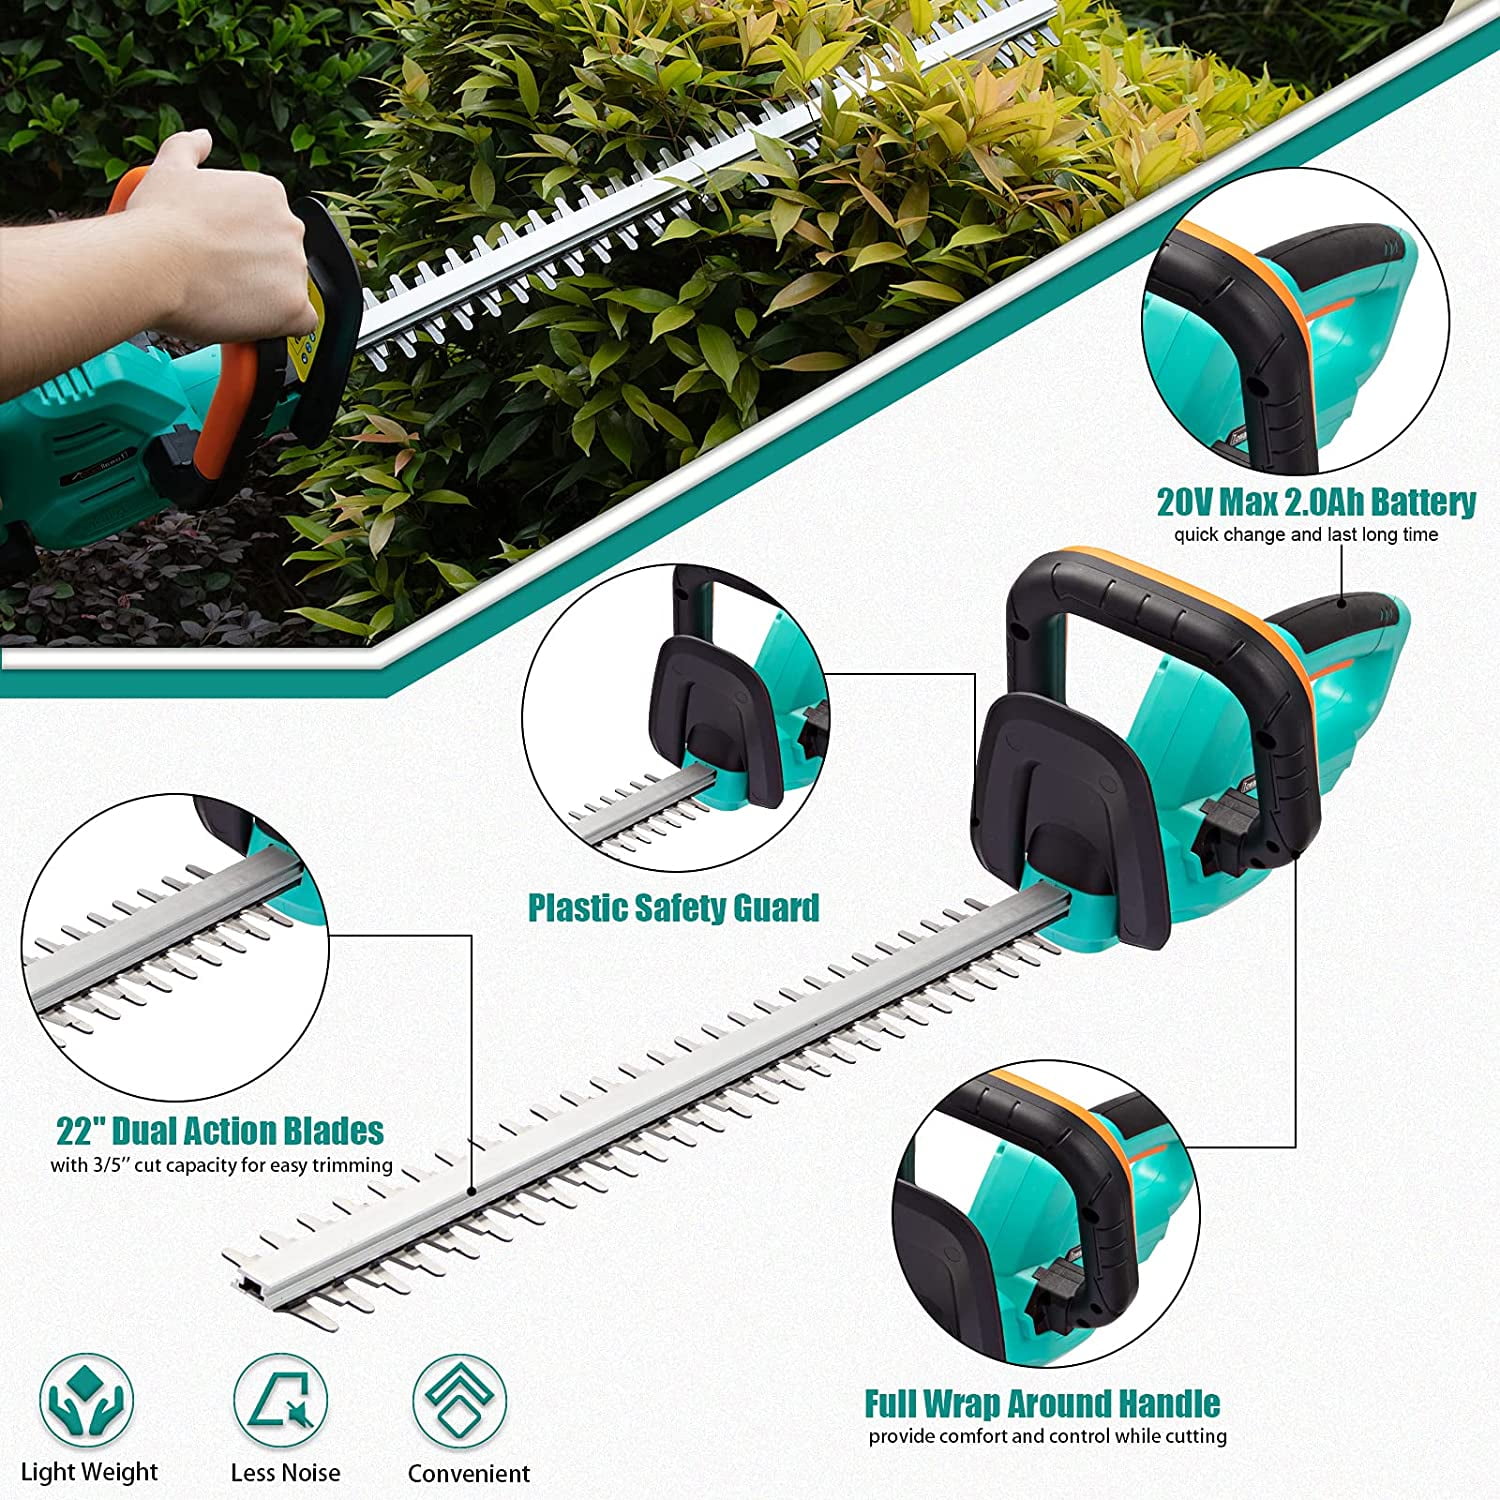 Lightweight Electric Hedge Trimmer kit with 22” Dual-Action Blade Cordless Hedge Trimmer Powerful Battery and Charger Included 20V Lithium-Ion Power Bush Hedge Trimmer for Yard & Garden Care 